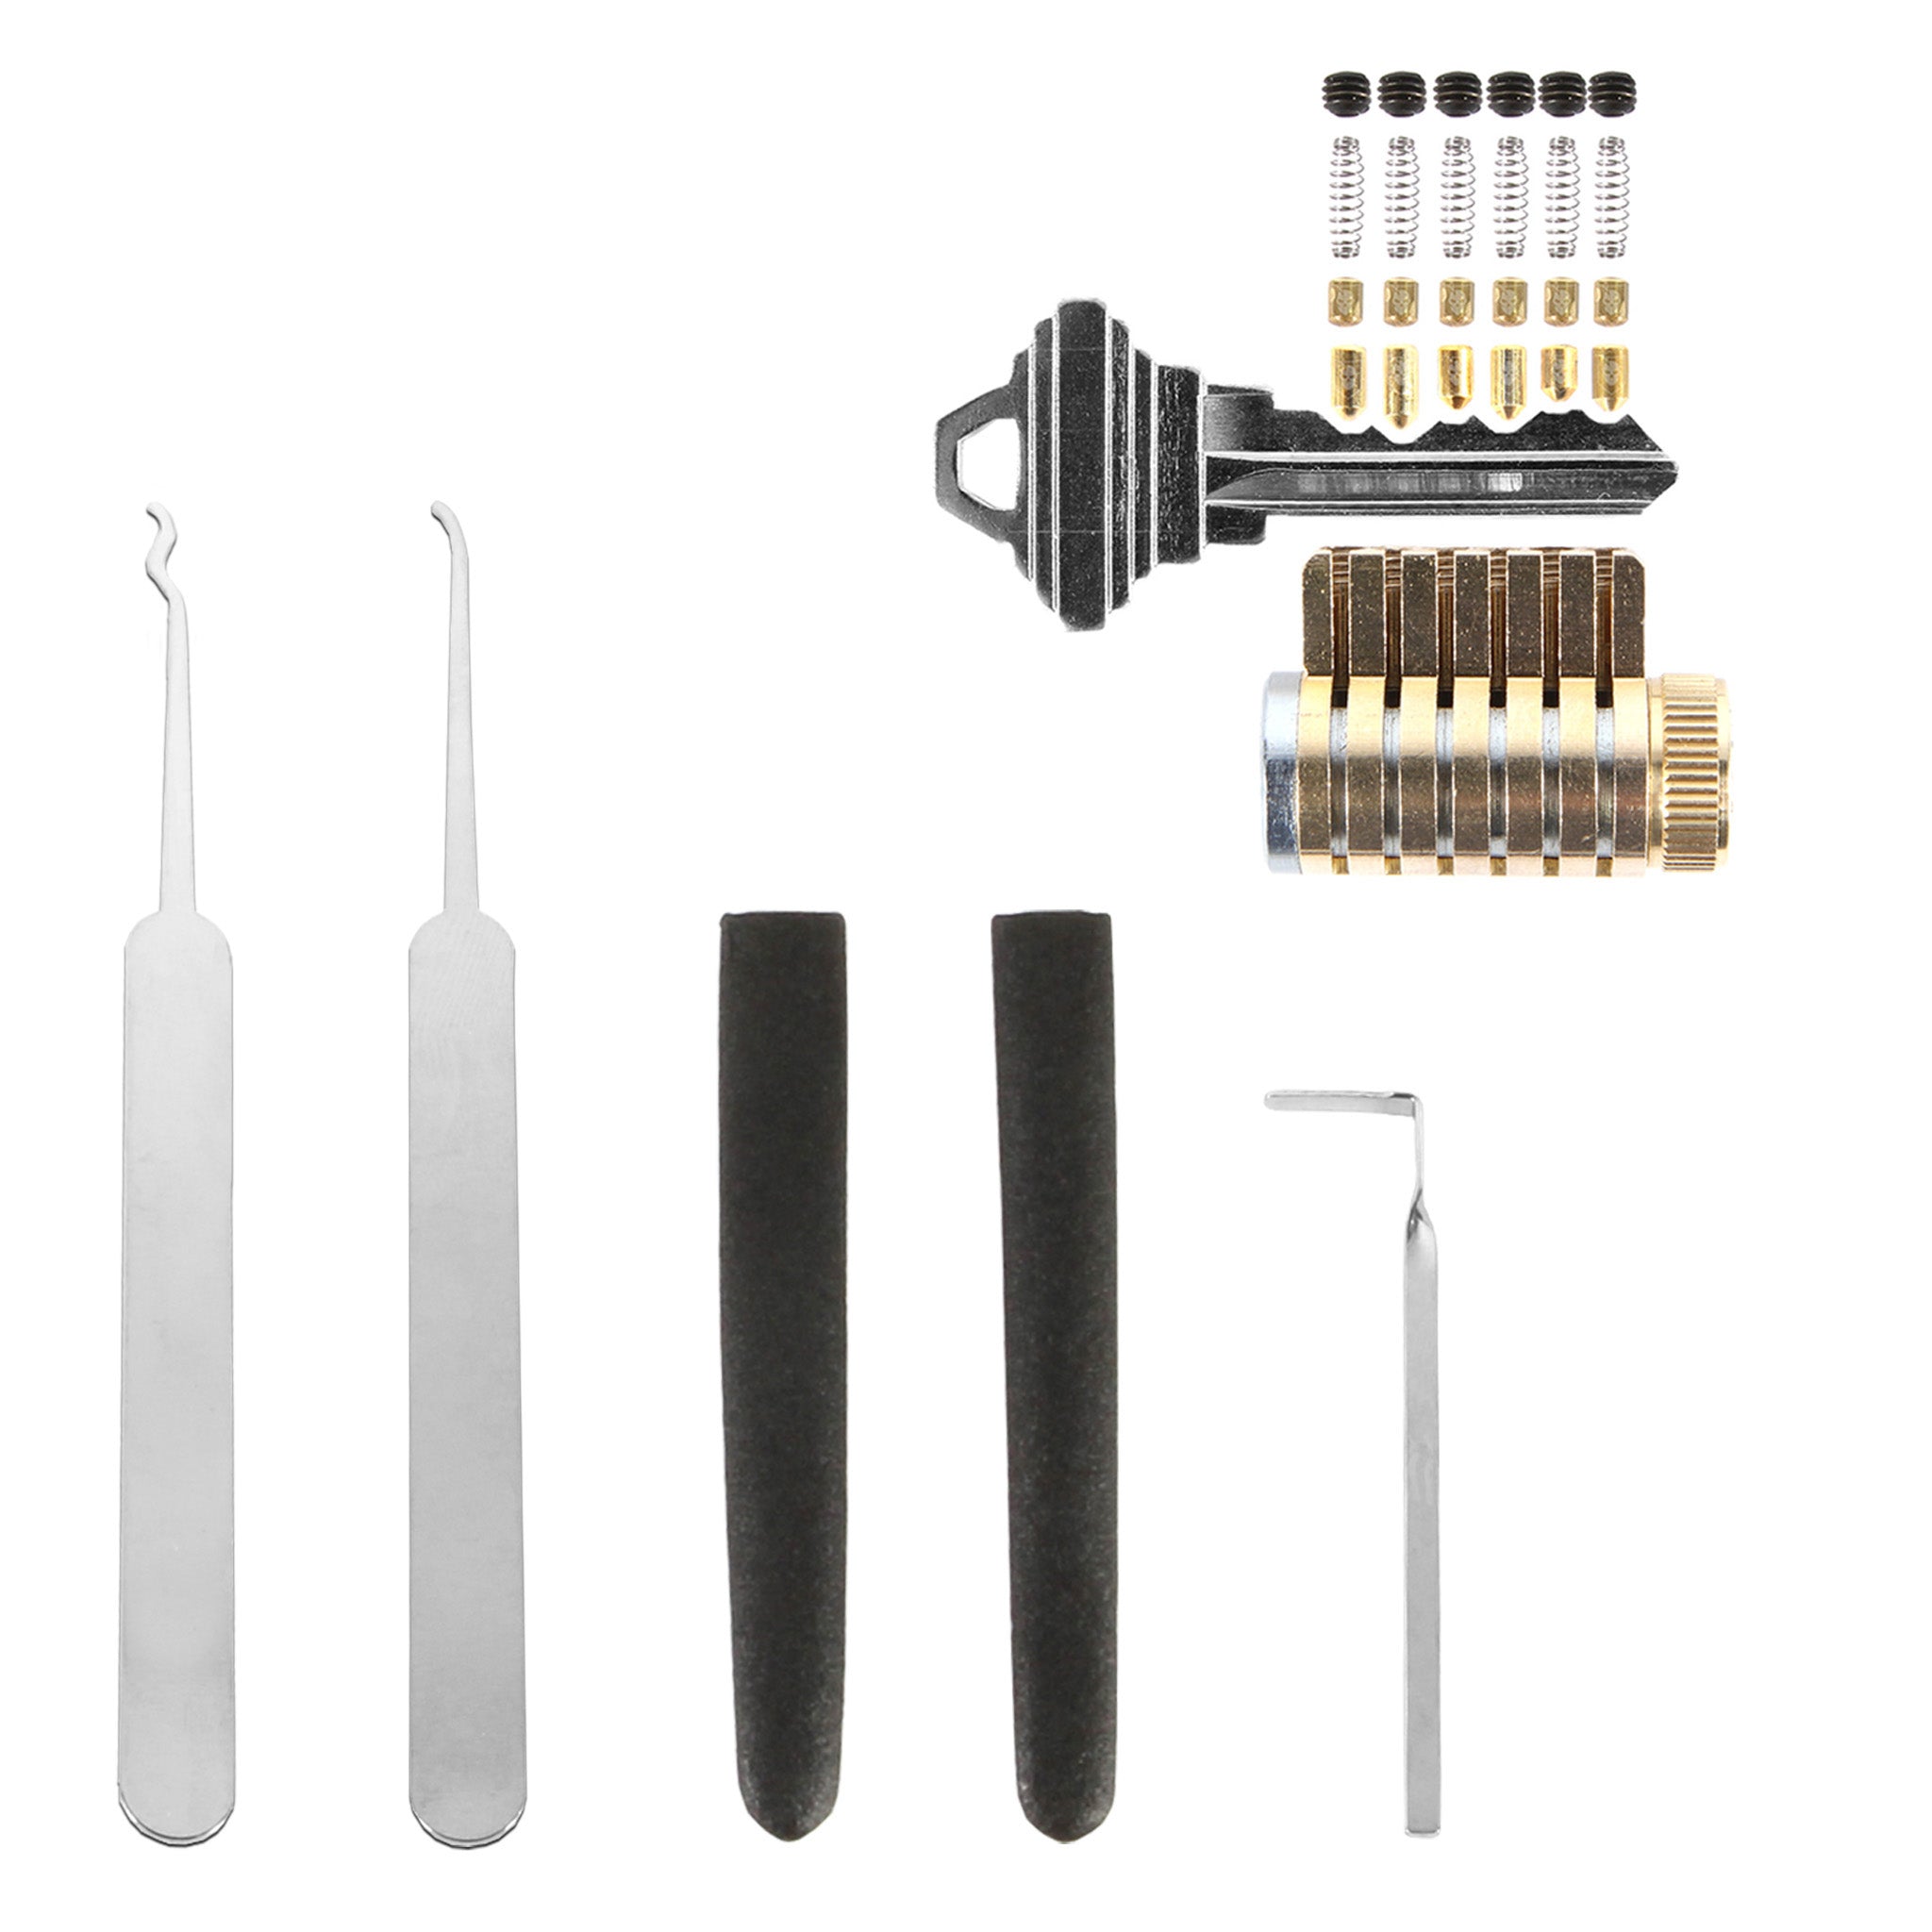 ITS Lock Picking 101 Kit – ITS Tactical